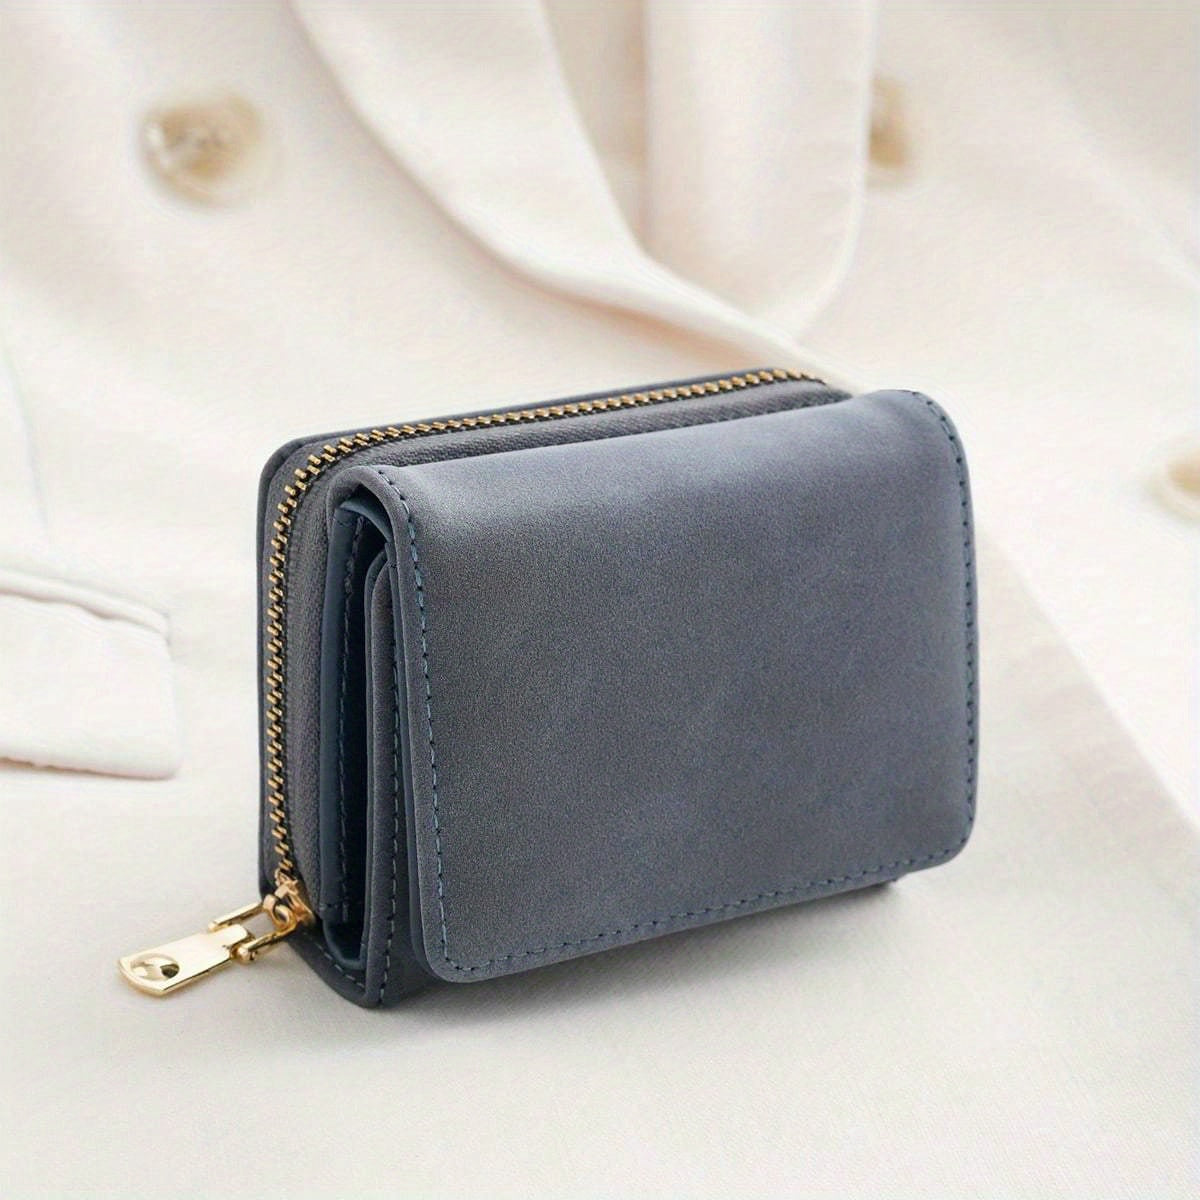 Snap Button Small Wallet, Cute Fold Faux Leather Wallet With Card Slots & Zipper Pocket